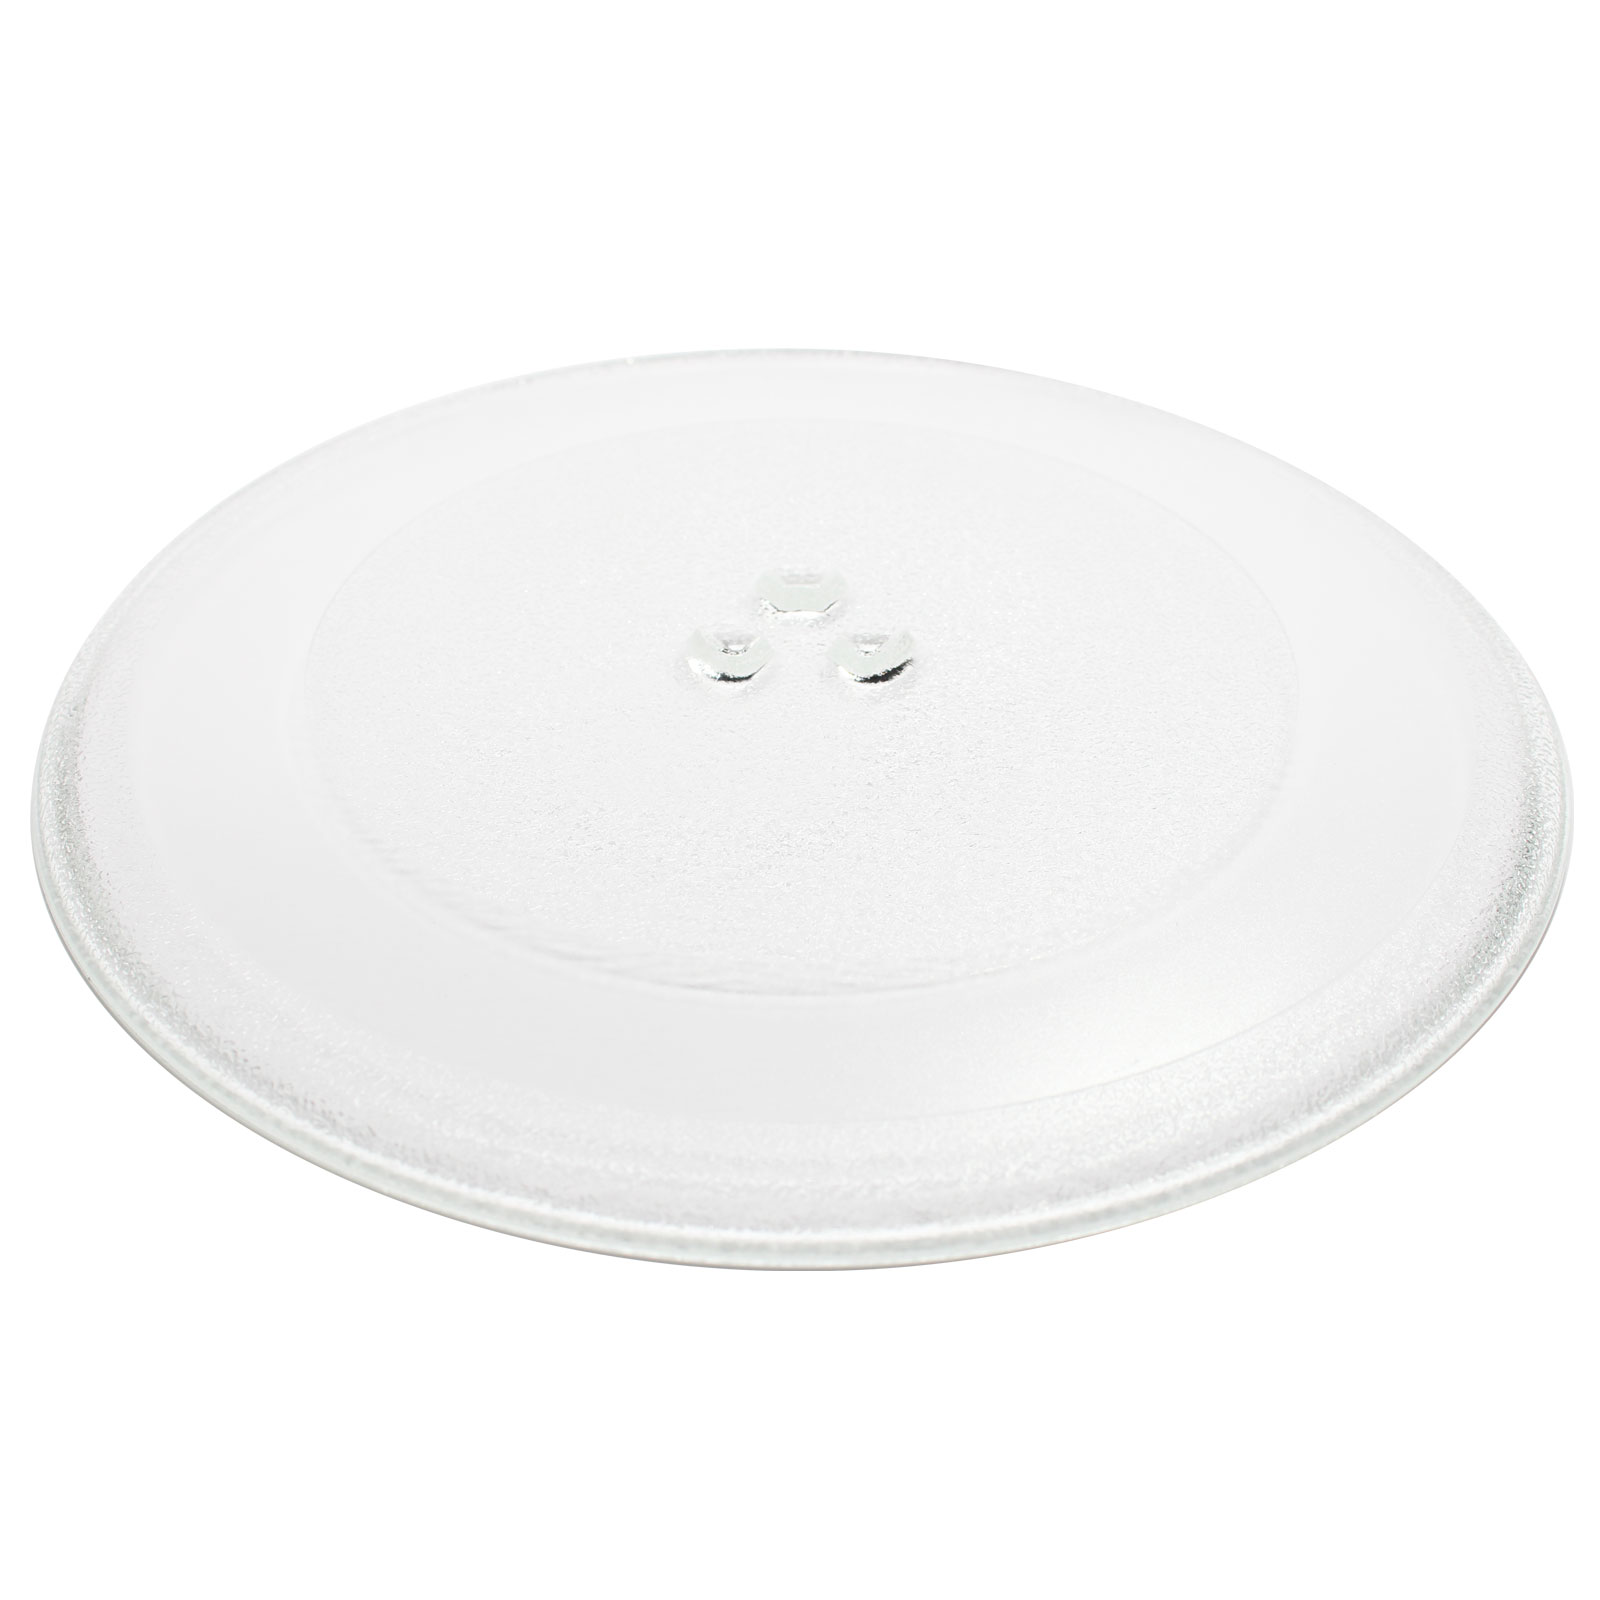 UpStart Components Replacement GE WB49X10074 Microwave Glass Plate  - Compatible GE WB49X10074 Microwave Glass Turntable Tray - 12 3/4" (325mm)